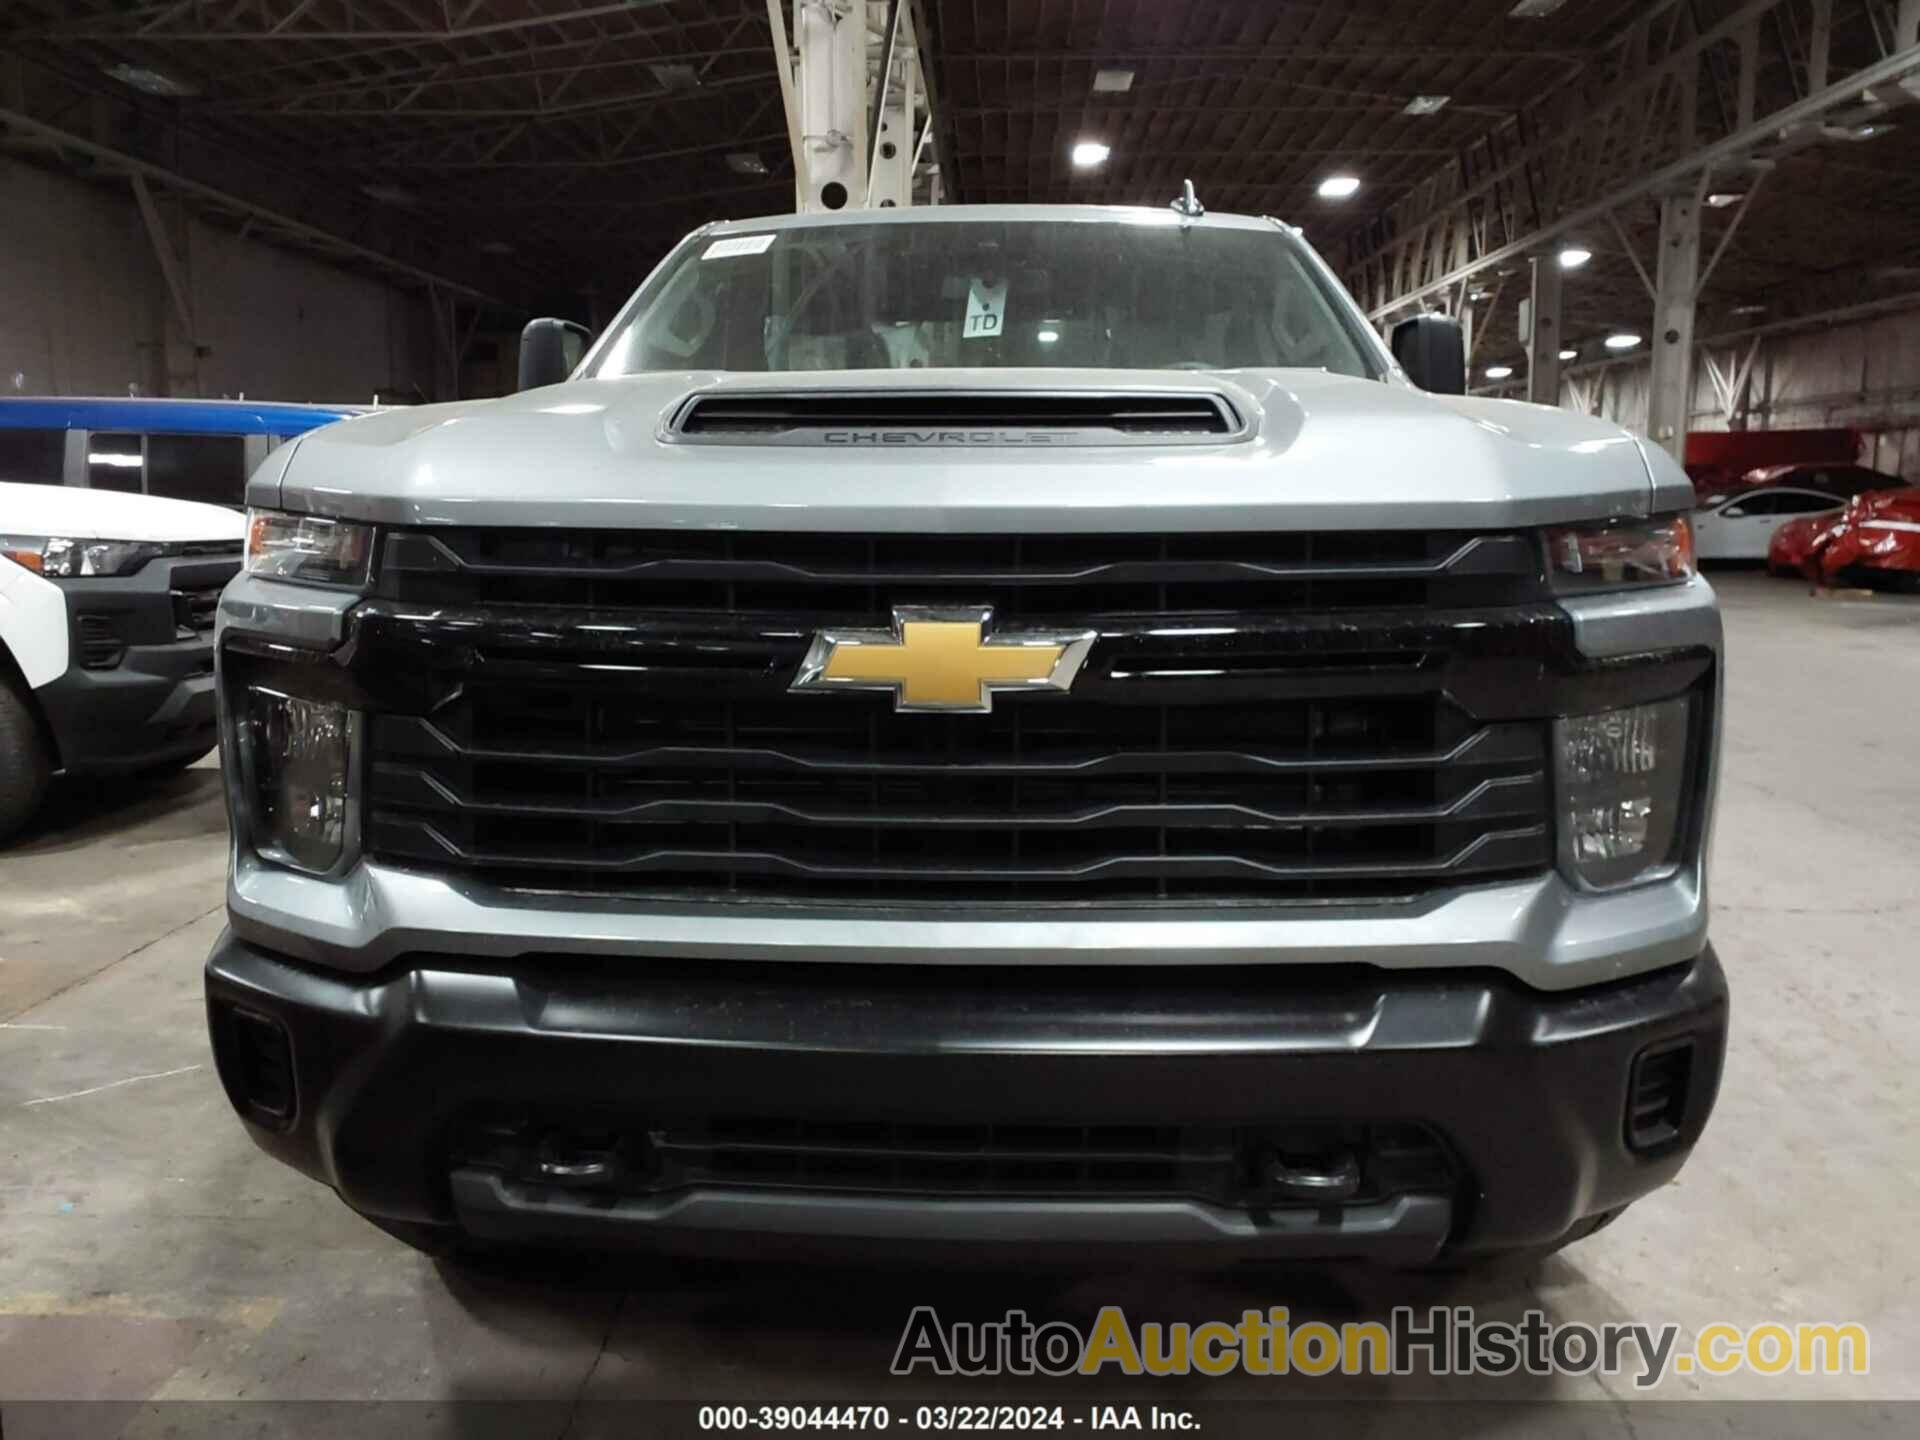 CHEVROLET SILVERADO 2500HD 4WD DOUBLE CAB LONG BED WORK TRUCK, 1GC5YLE72RF309159